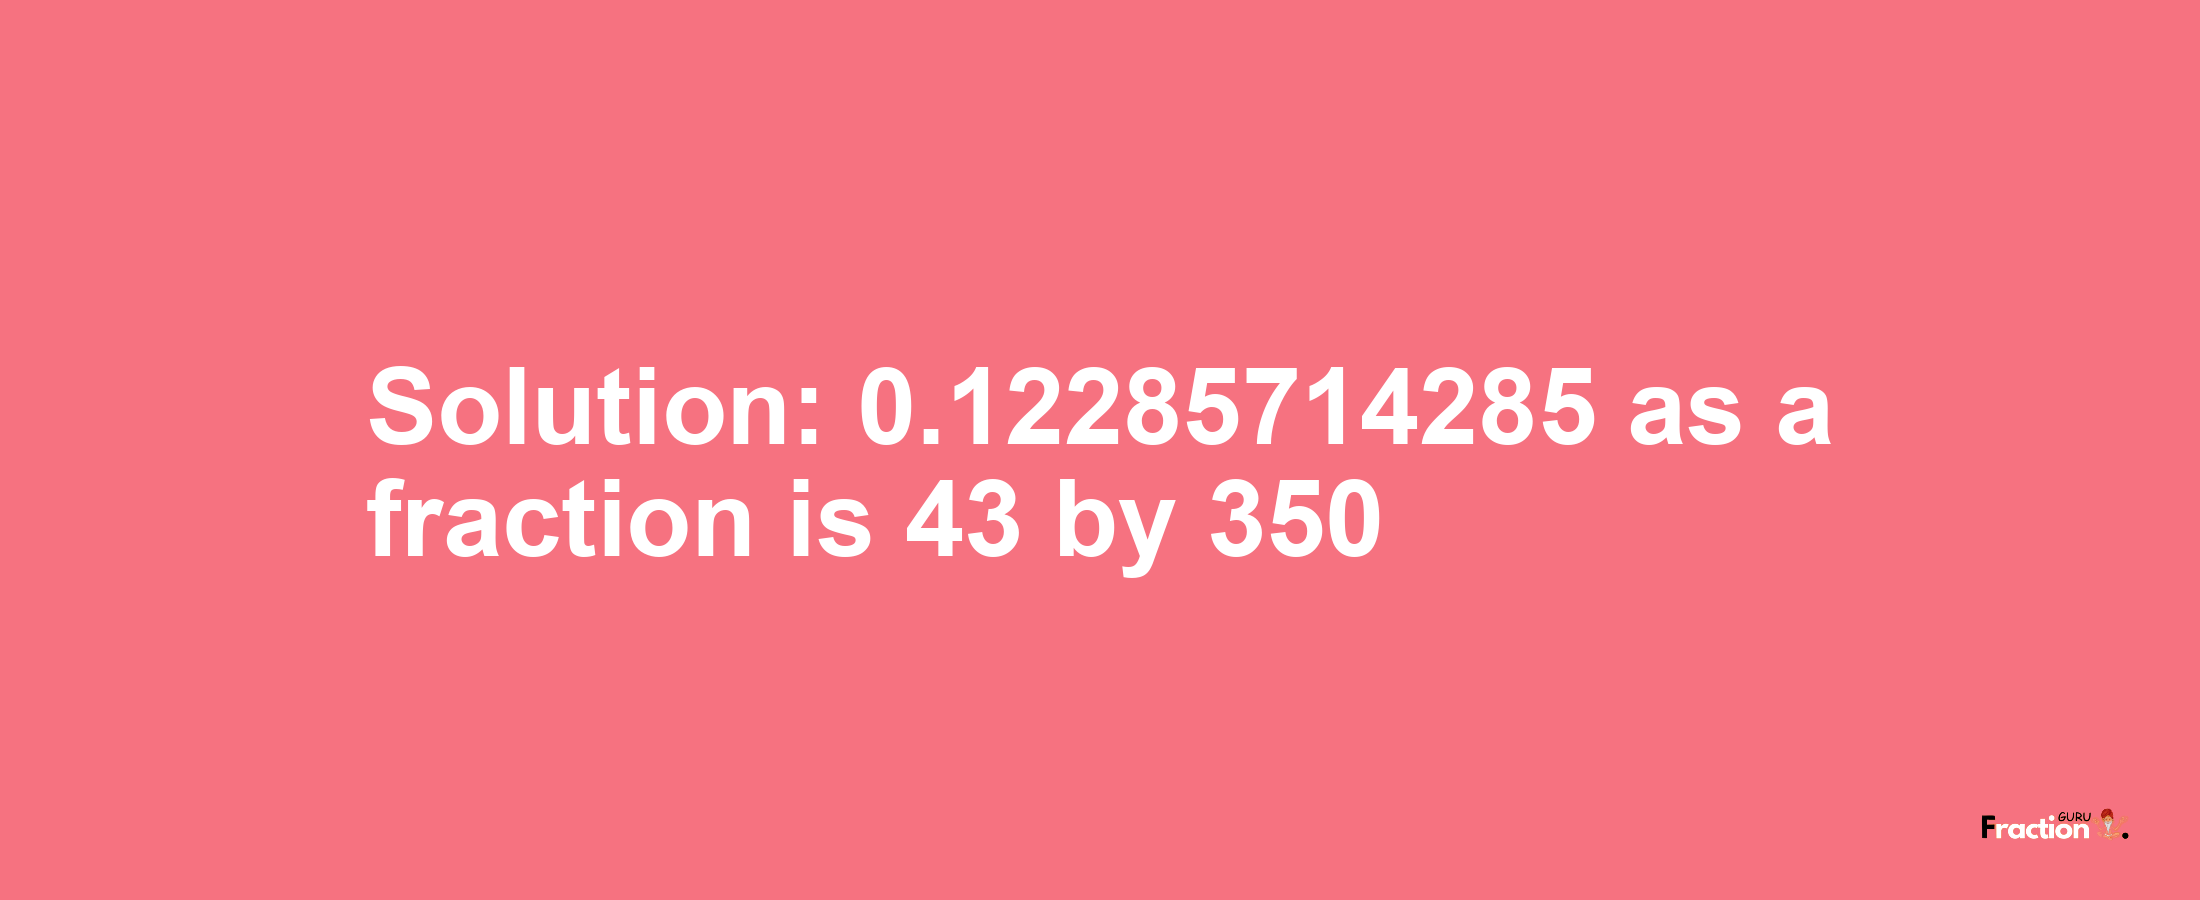 Solution:0.12285714285 as a fraction is 43/350